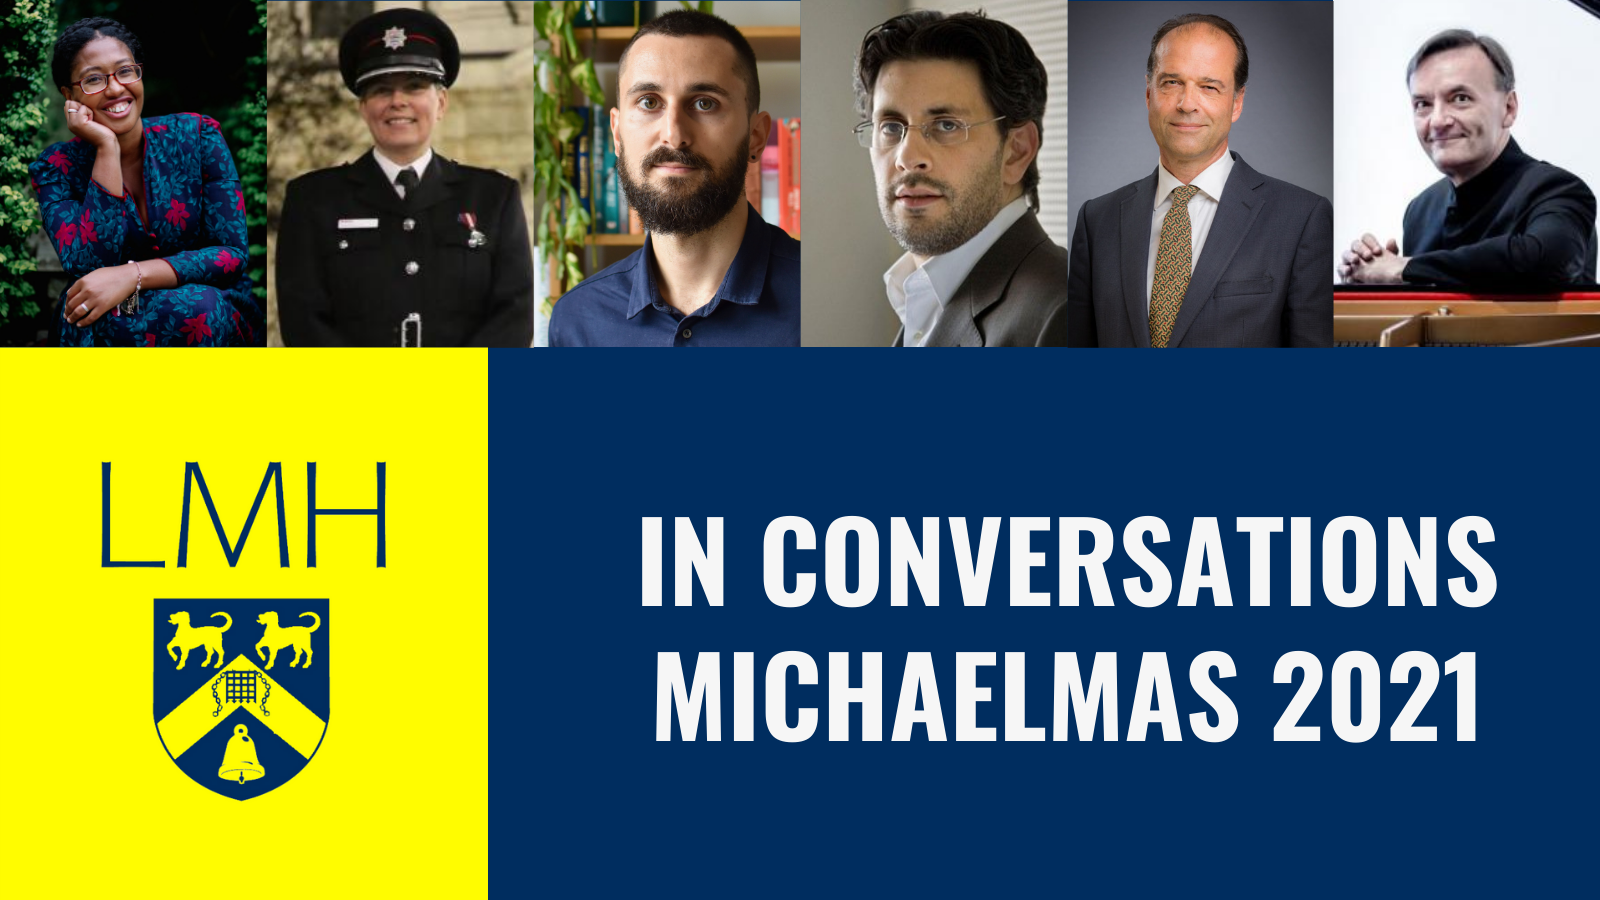 LMH In Conversation graphic featuring guest speakers from Michaelmas 2021